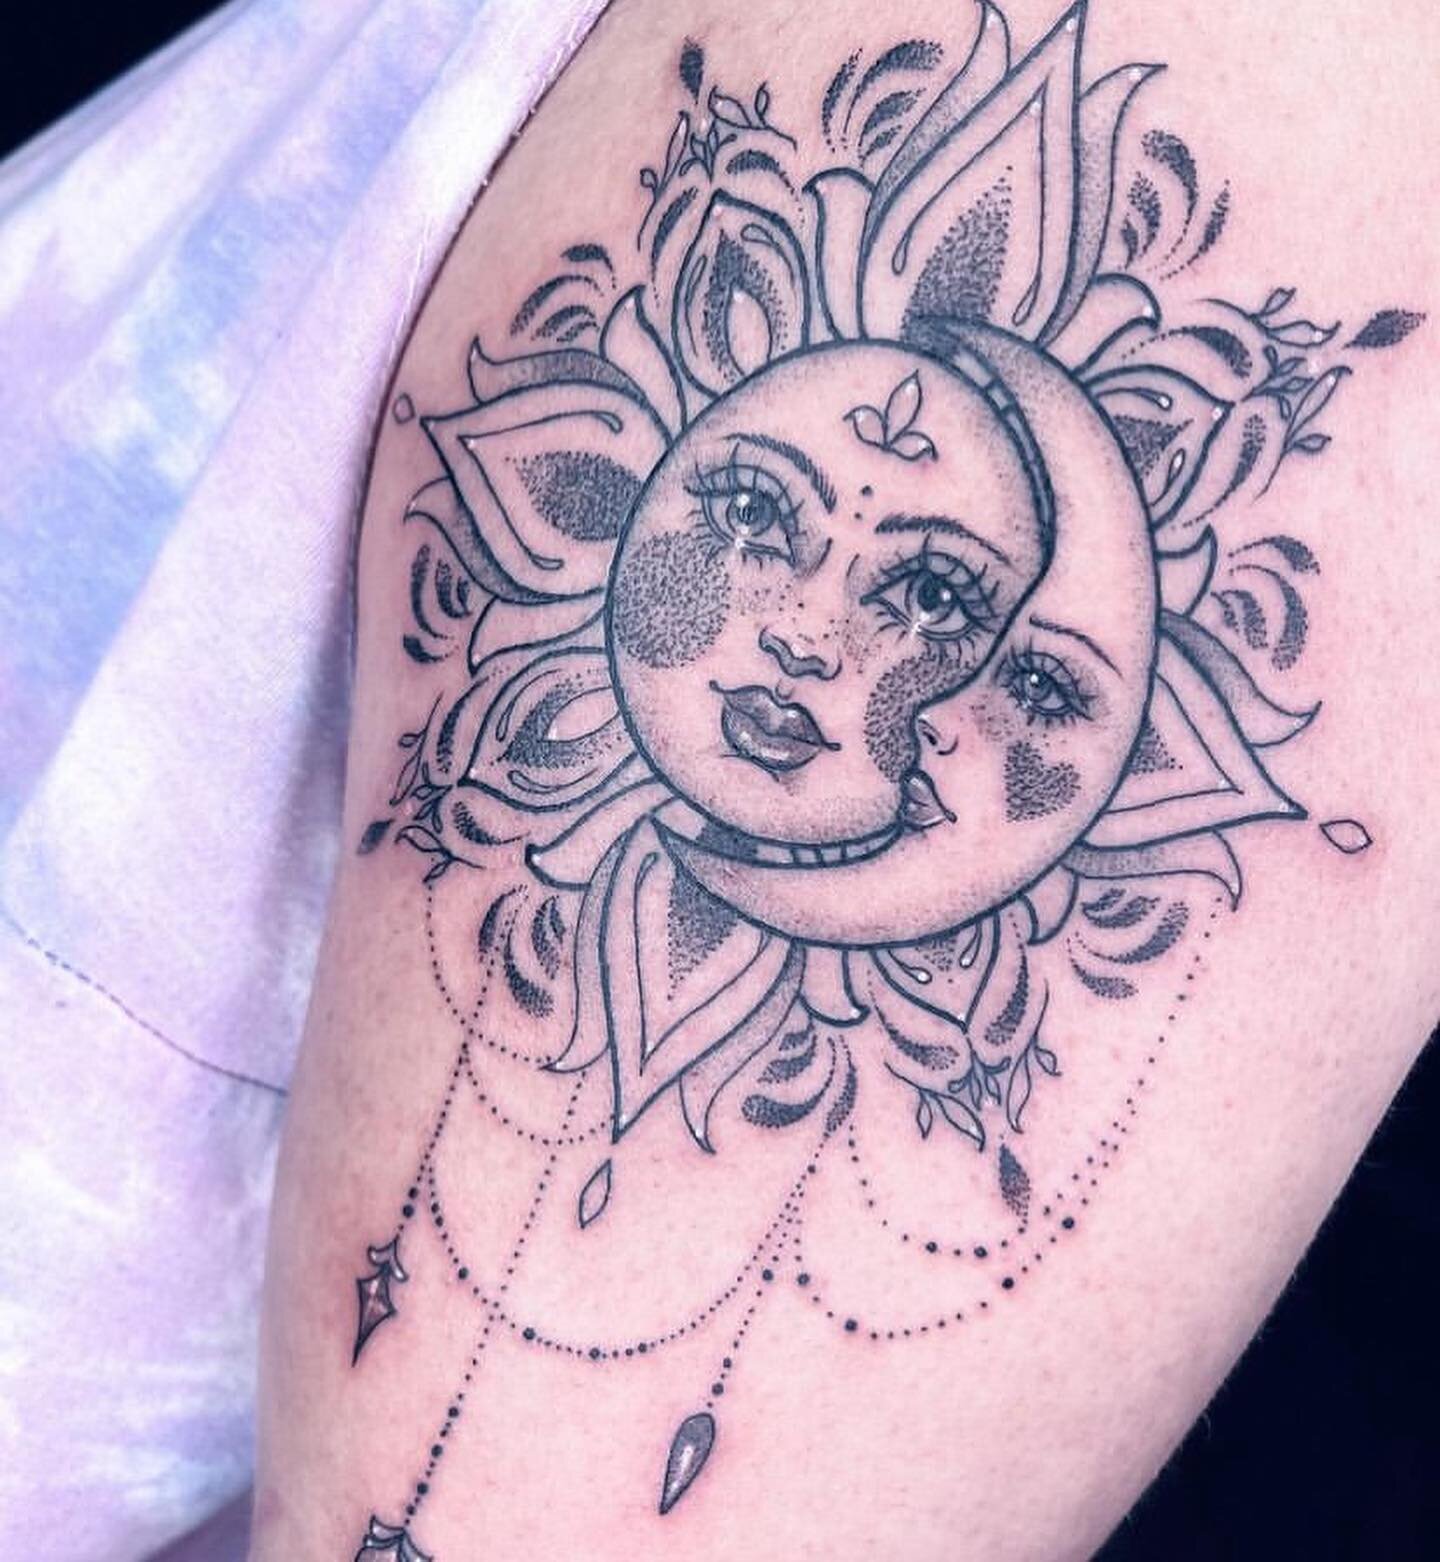 @keelyrosetattoo 🌙 

@molliepopart 🦋 (guest 7th October , message her directly or email us on our website)

@lucyellenart 🌻